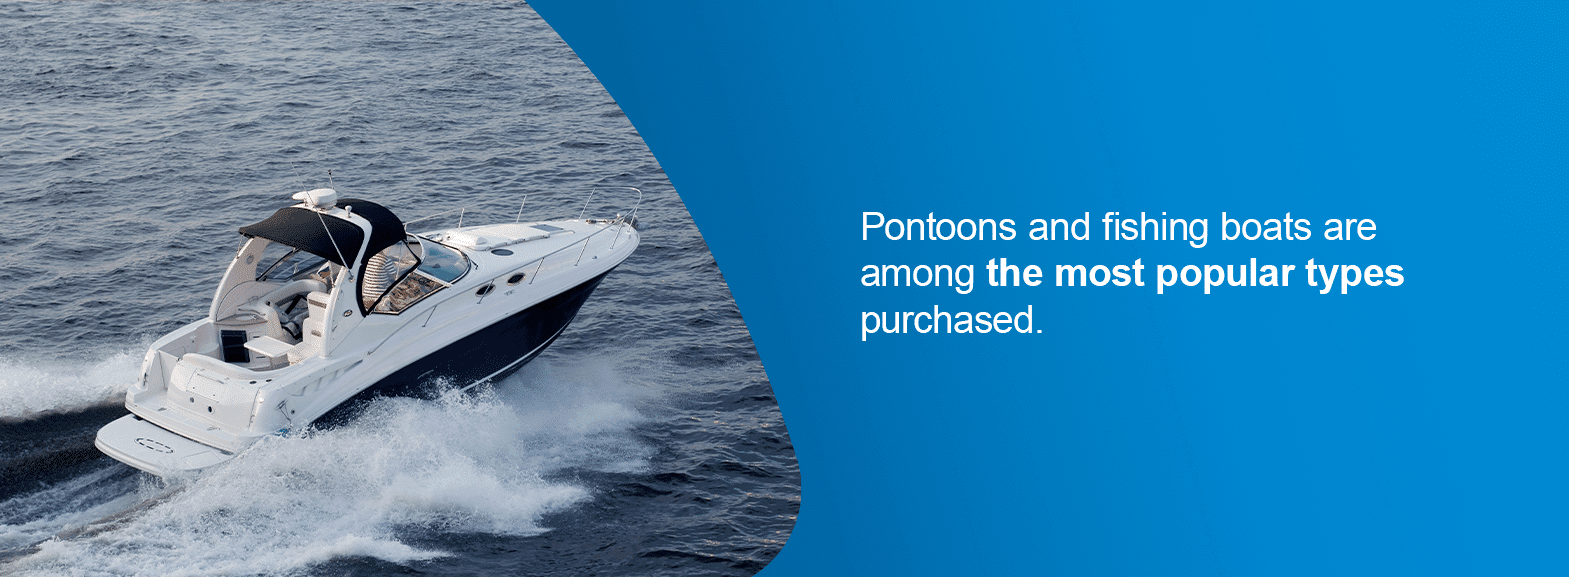 Boat Loan Industry - Pontoons and fishing boats are among the most popular types purchased.